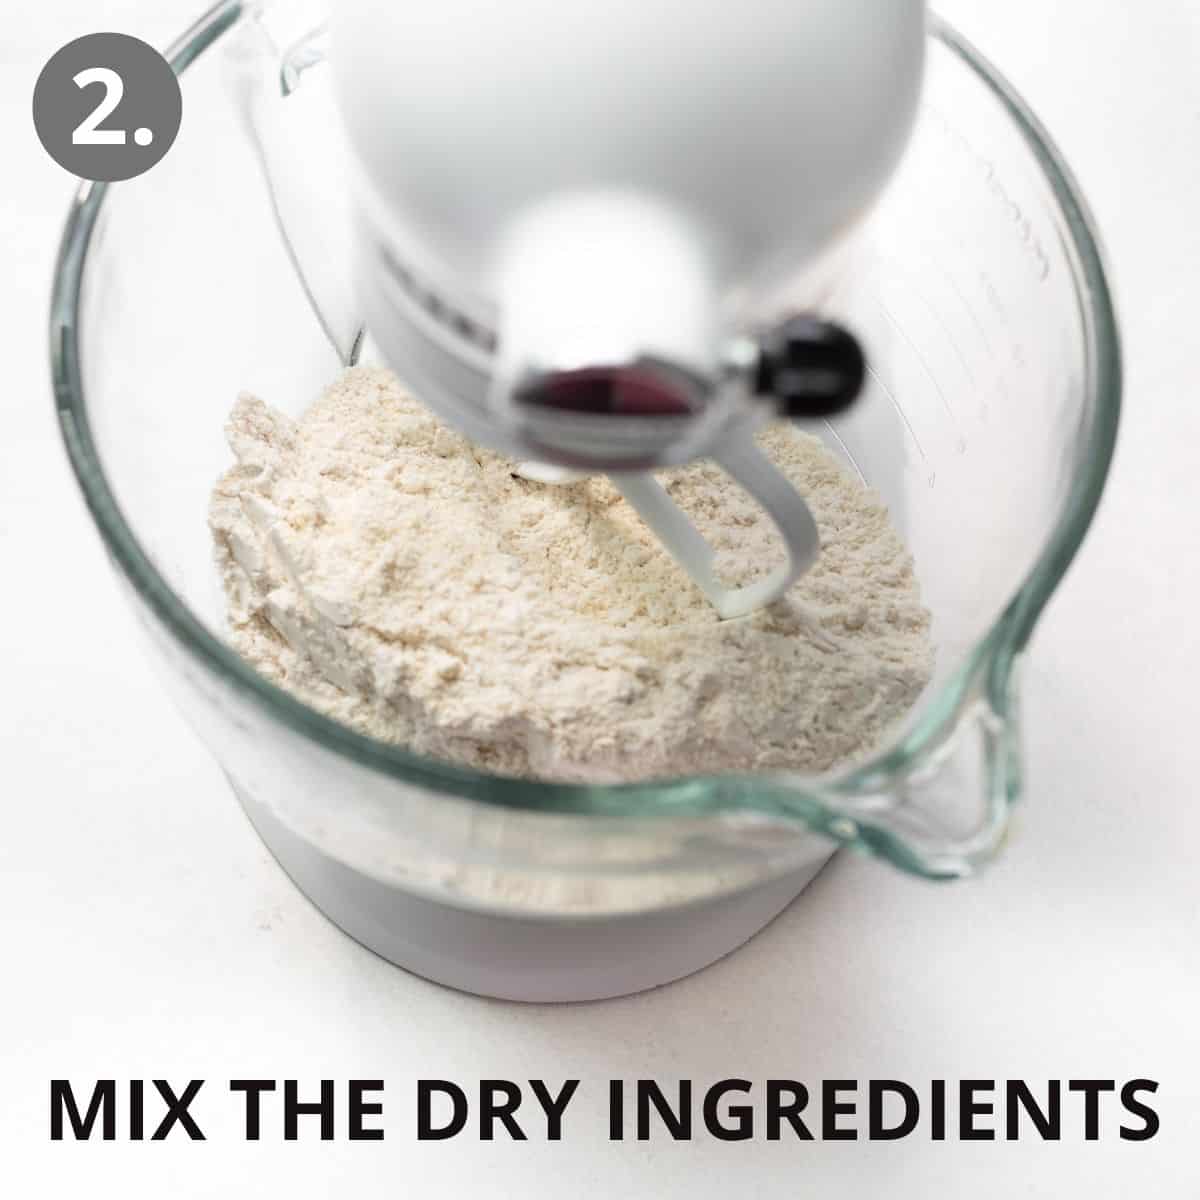 Dry ingredients in the bowl of a standing mixer